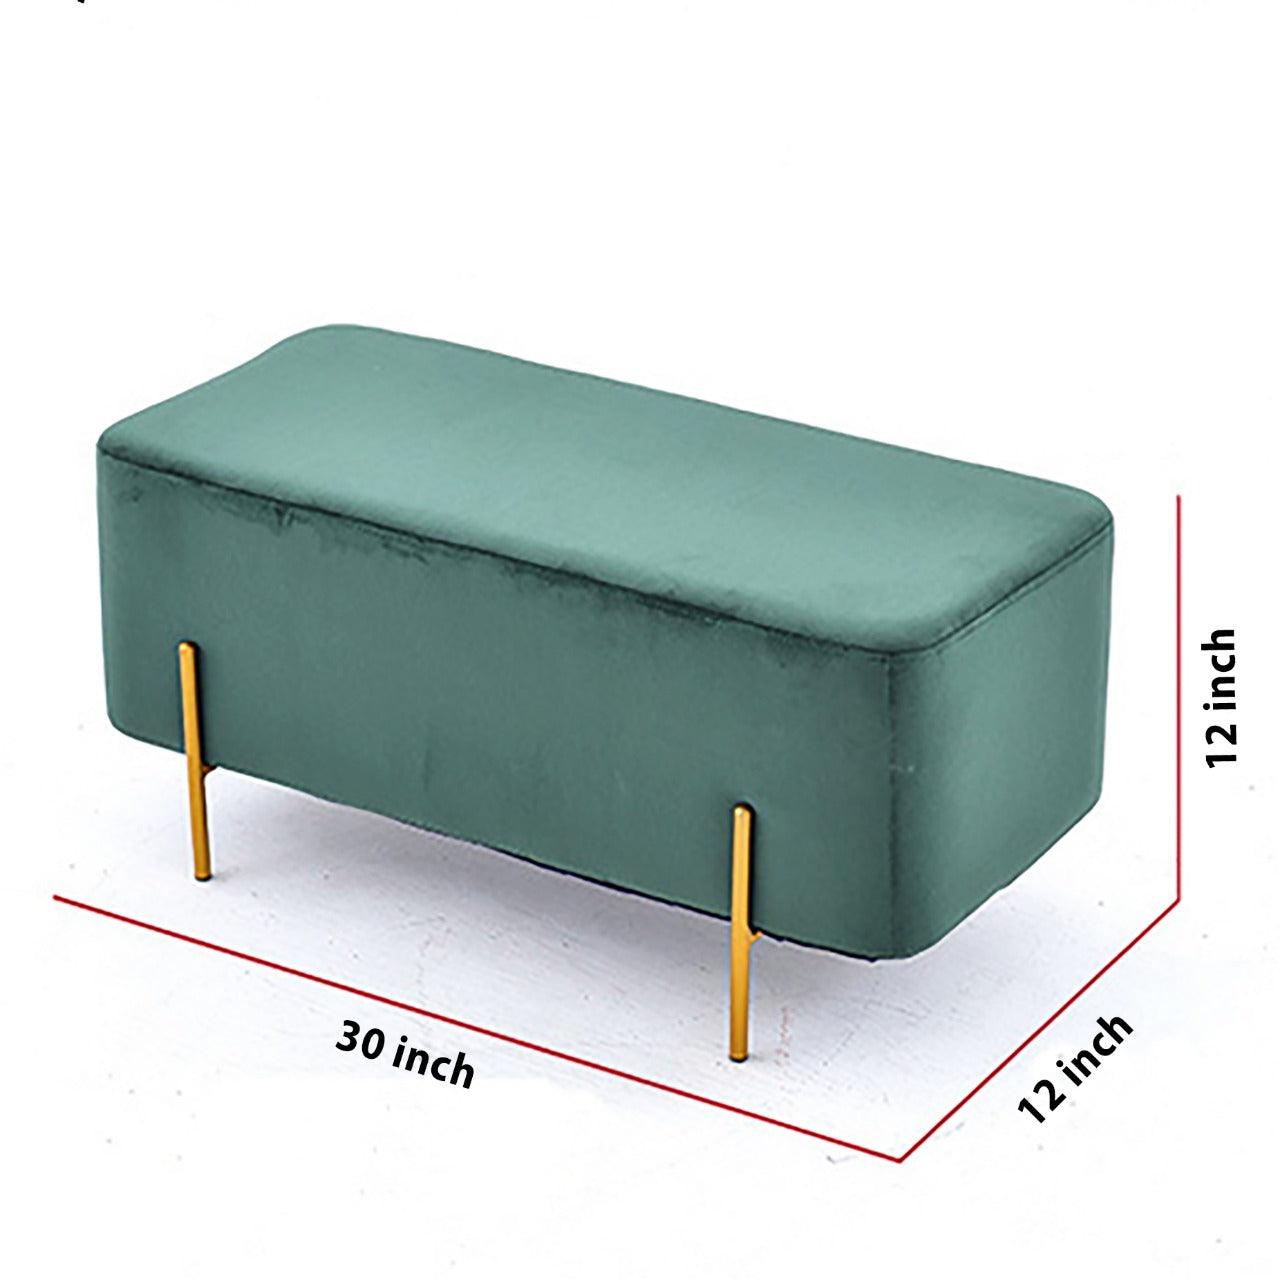 Wooden stool 2 Seater With Steel Stand - 170 - 92Bedding